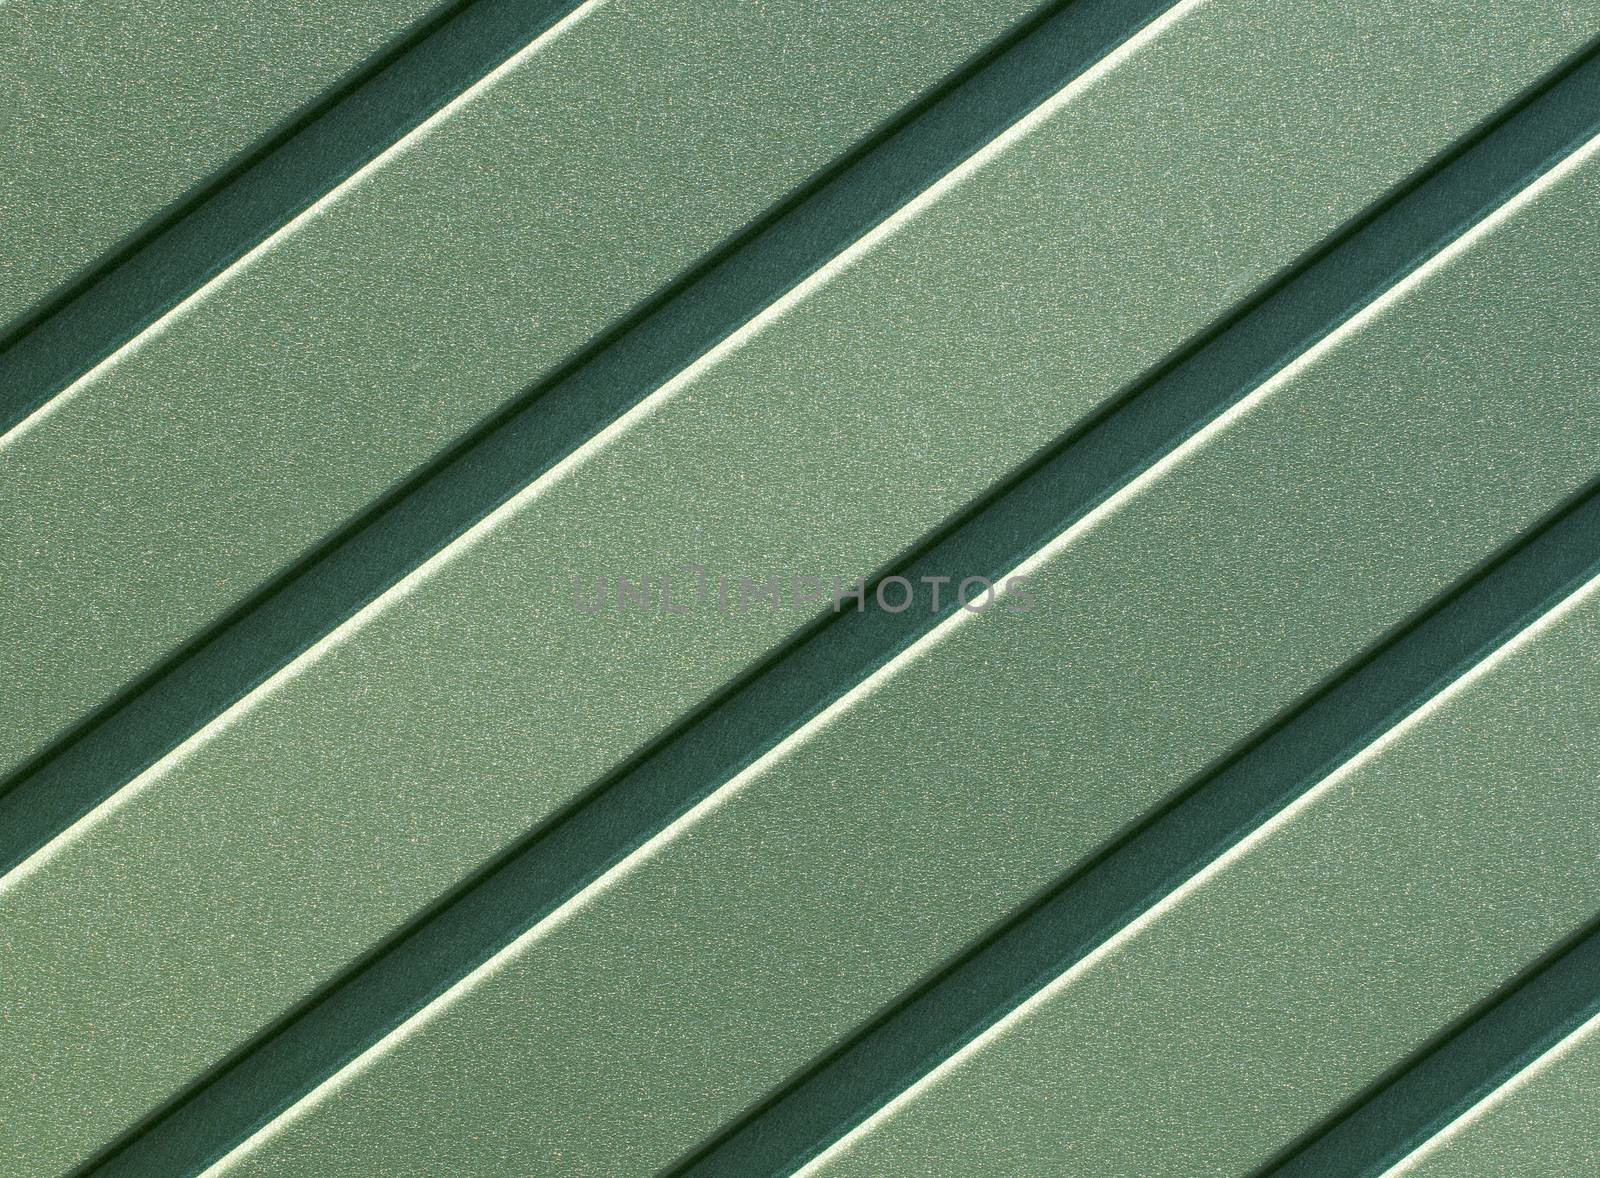 Green corrugated steel sheet with vertical guides. by Sergii